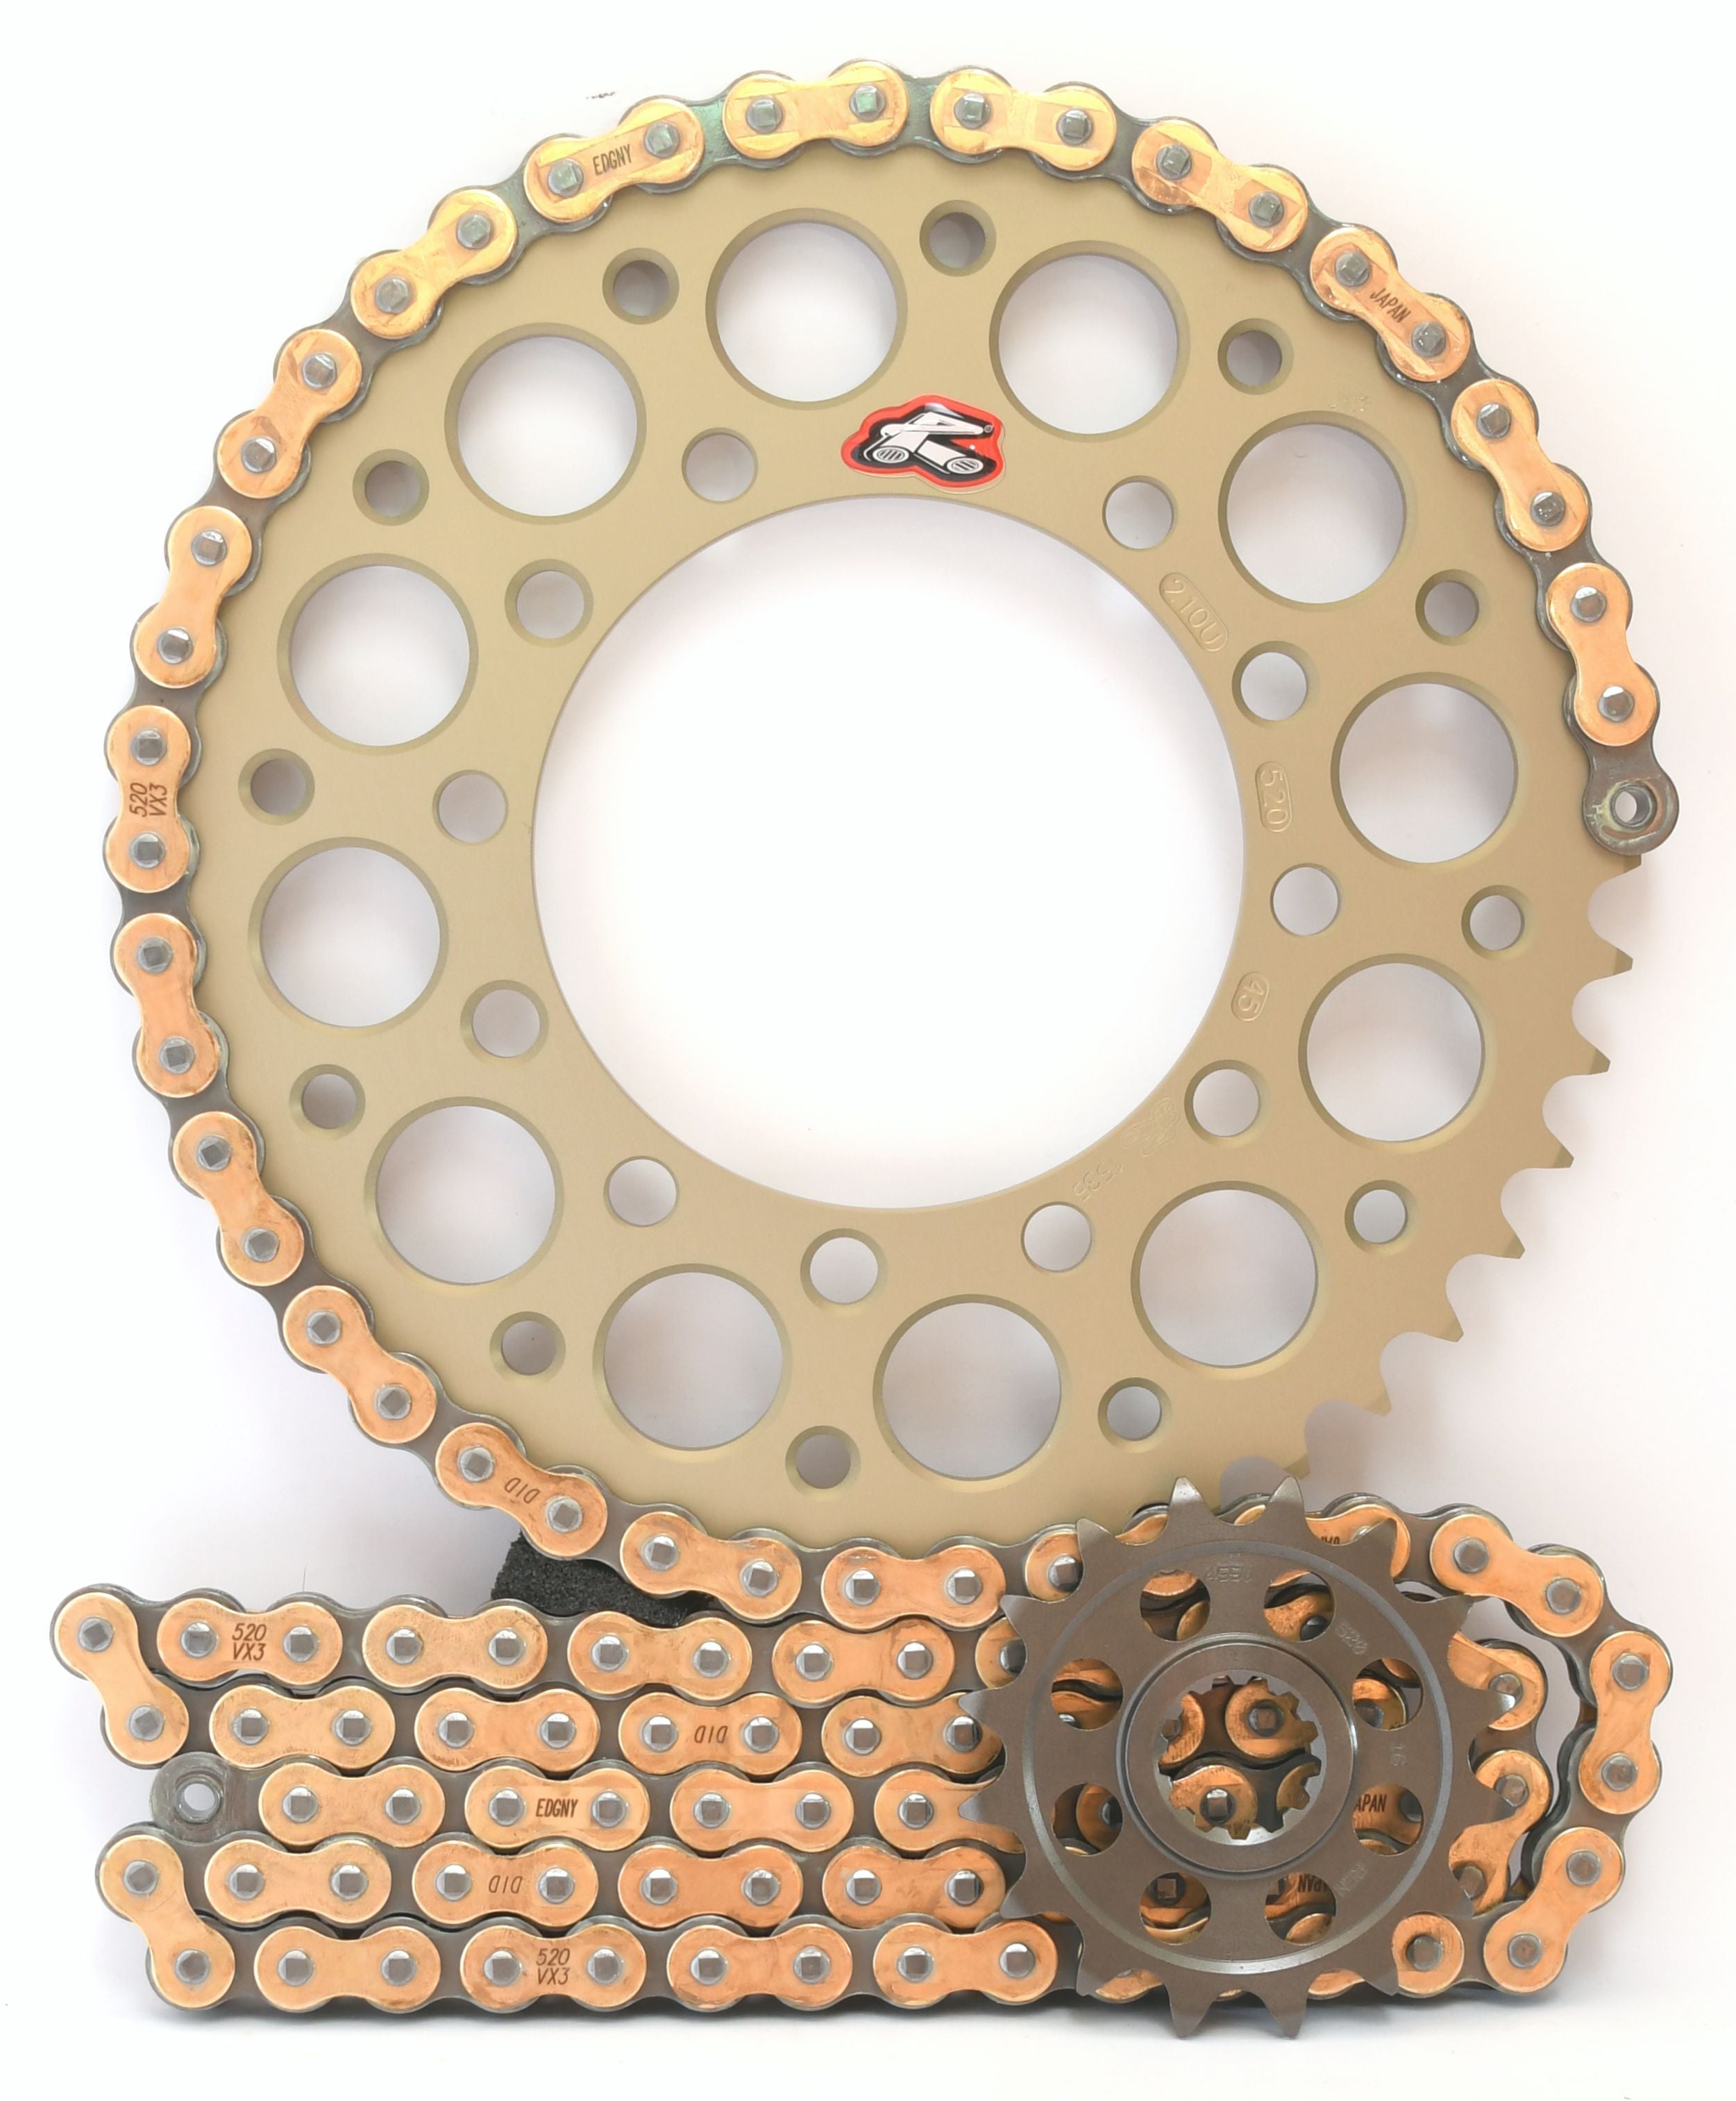 Renthal Ultralight and DID Chain & Sprocket Kit for Kawasaki ZX6R 2003-2004 - Standard Gearing